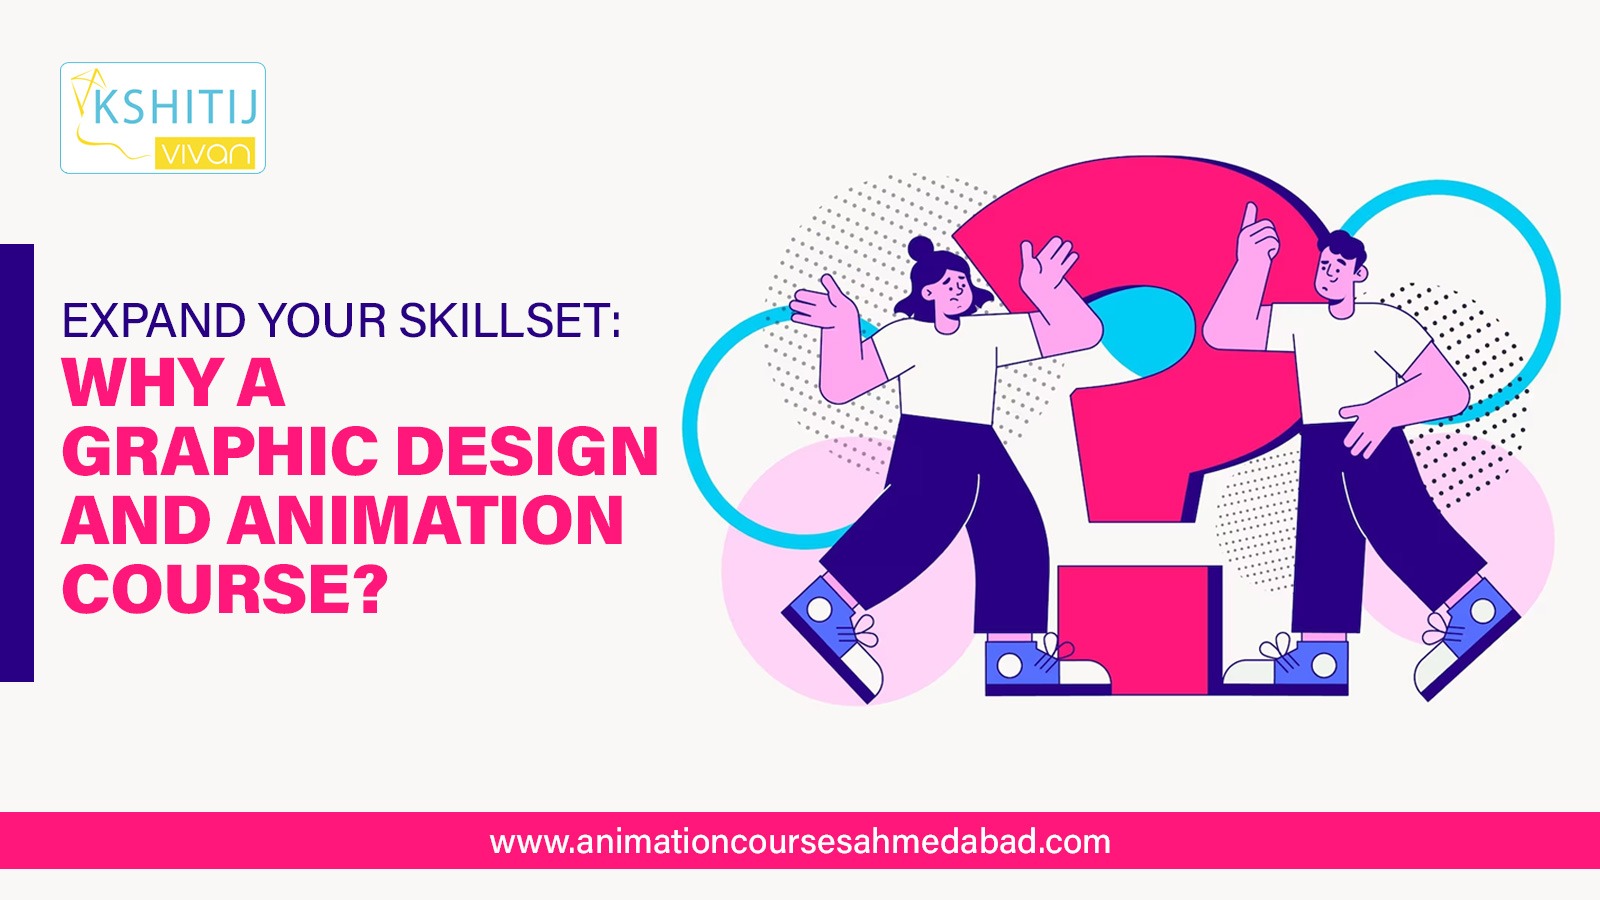 Expand your Skillset: Why a Graphic Design and Animation Course